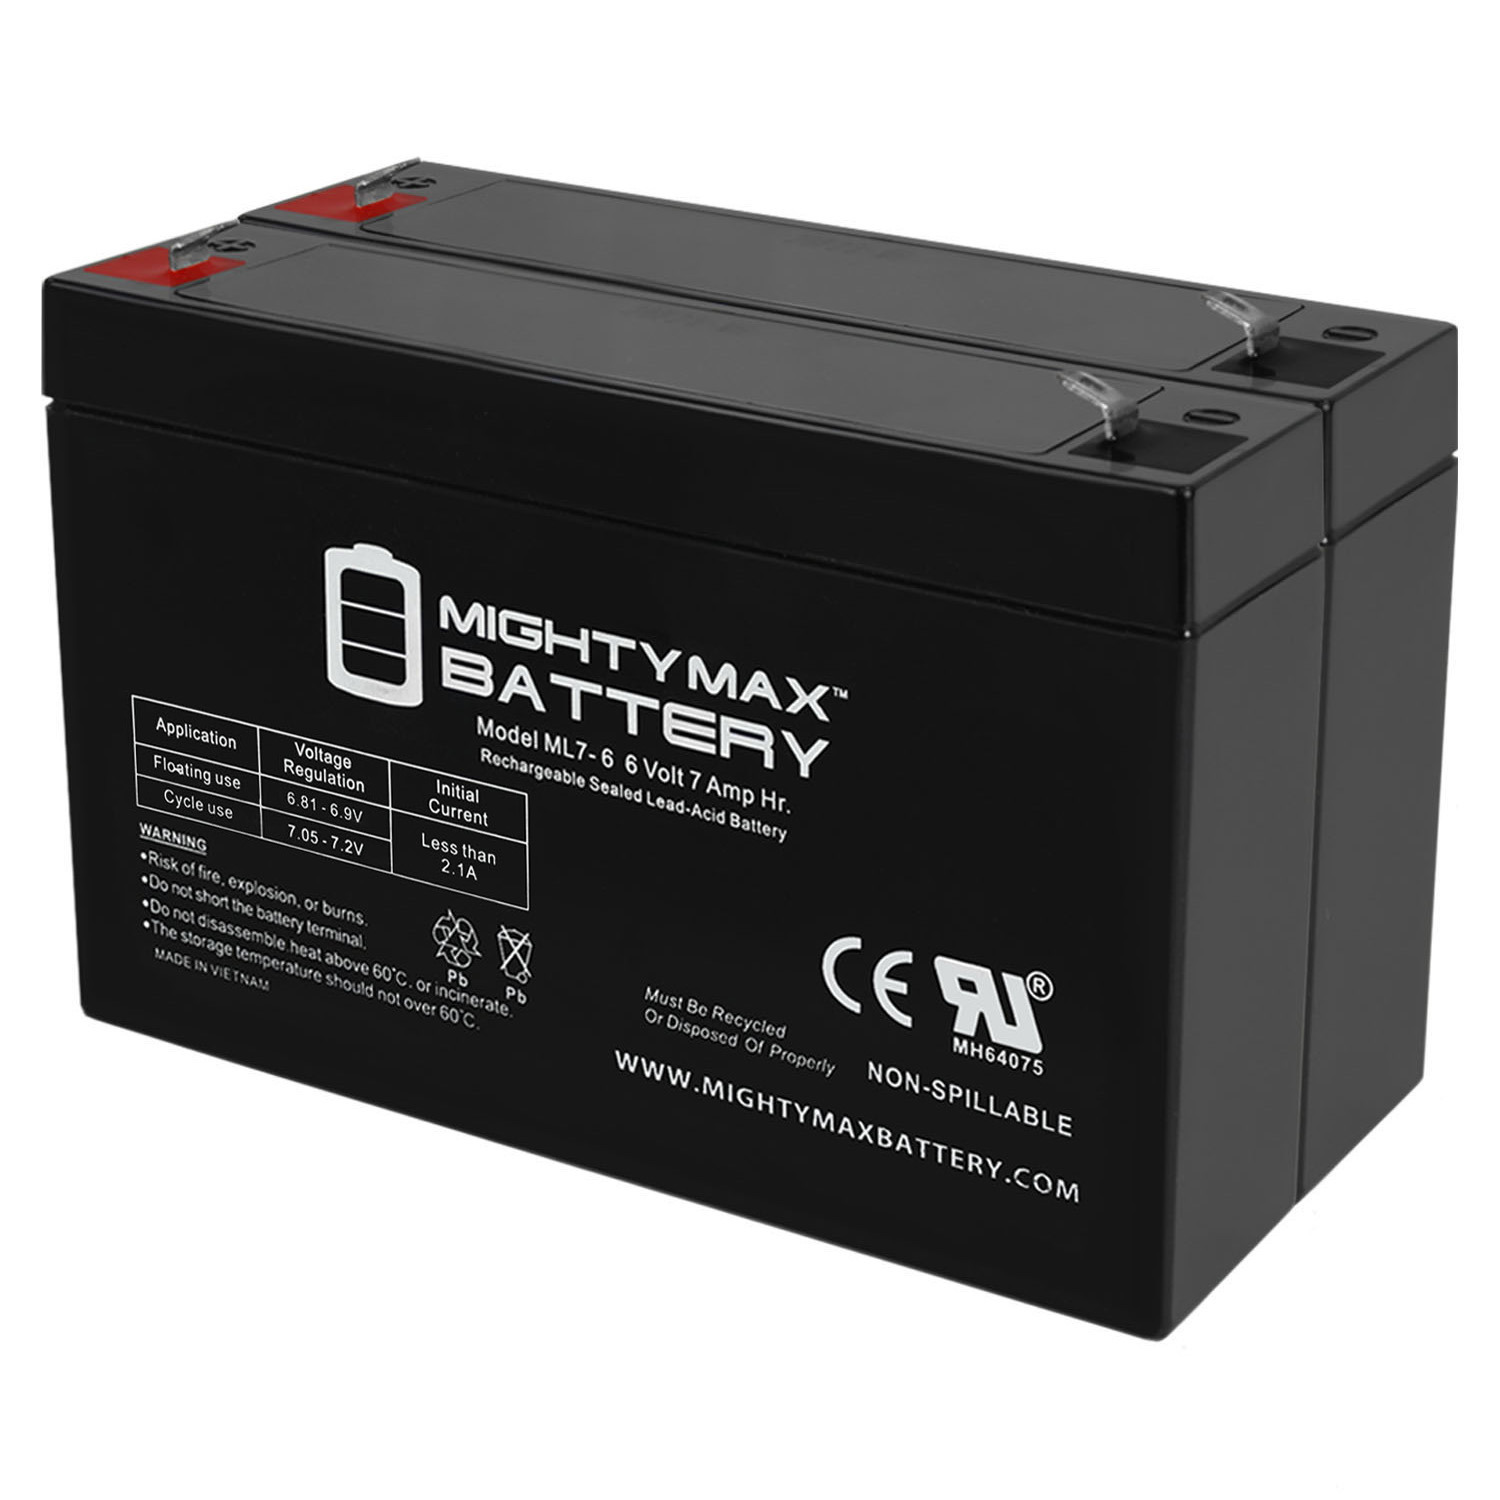 6V 7Ah SLA Replacement Battery for Sure-Lites AA1, A12 - 2 Pack